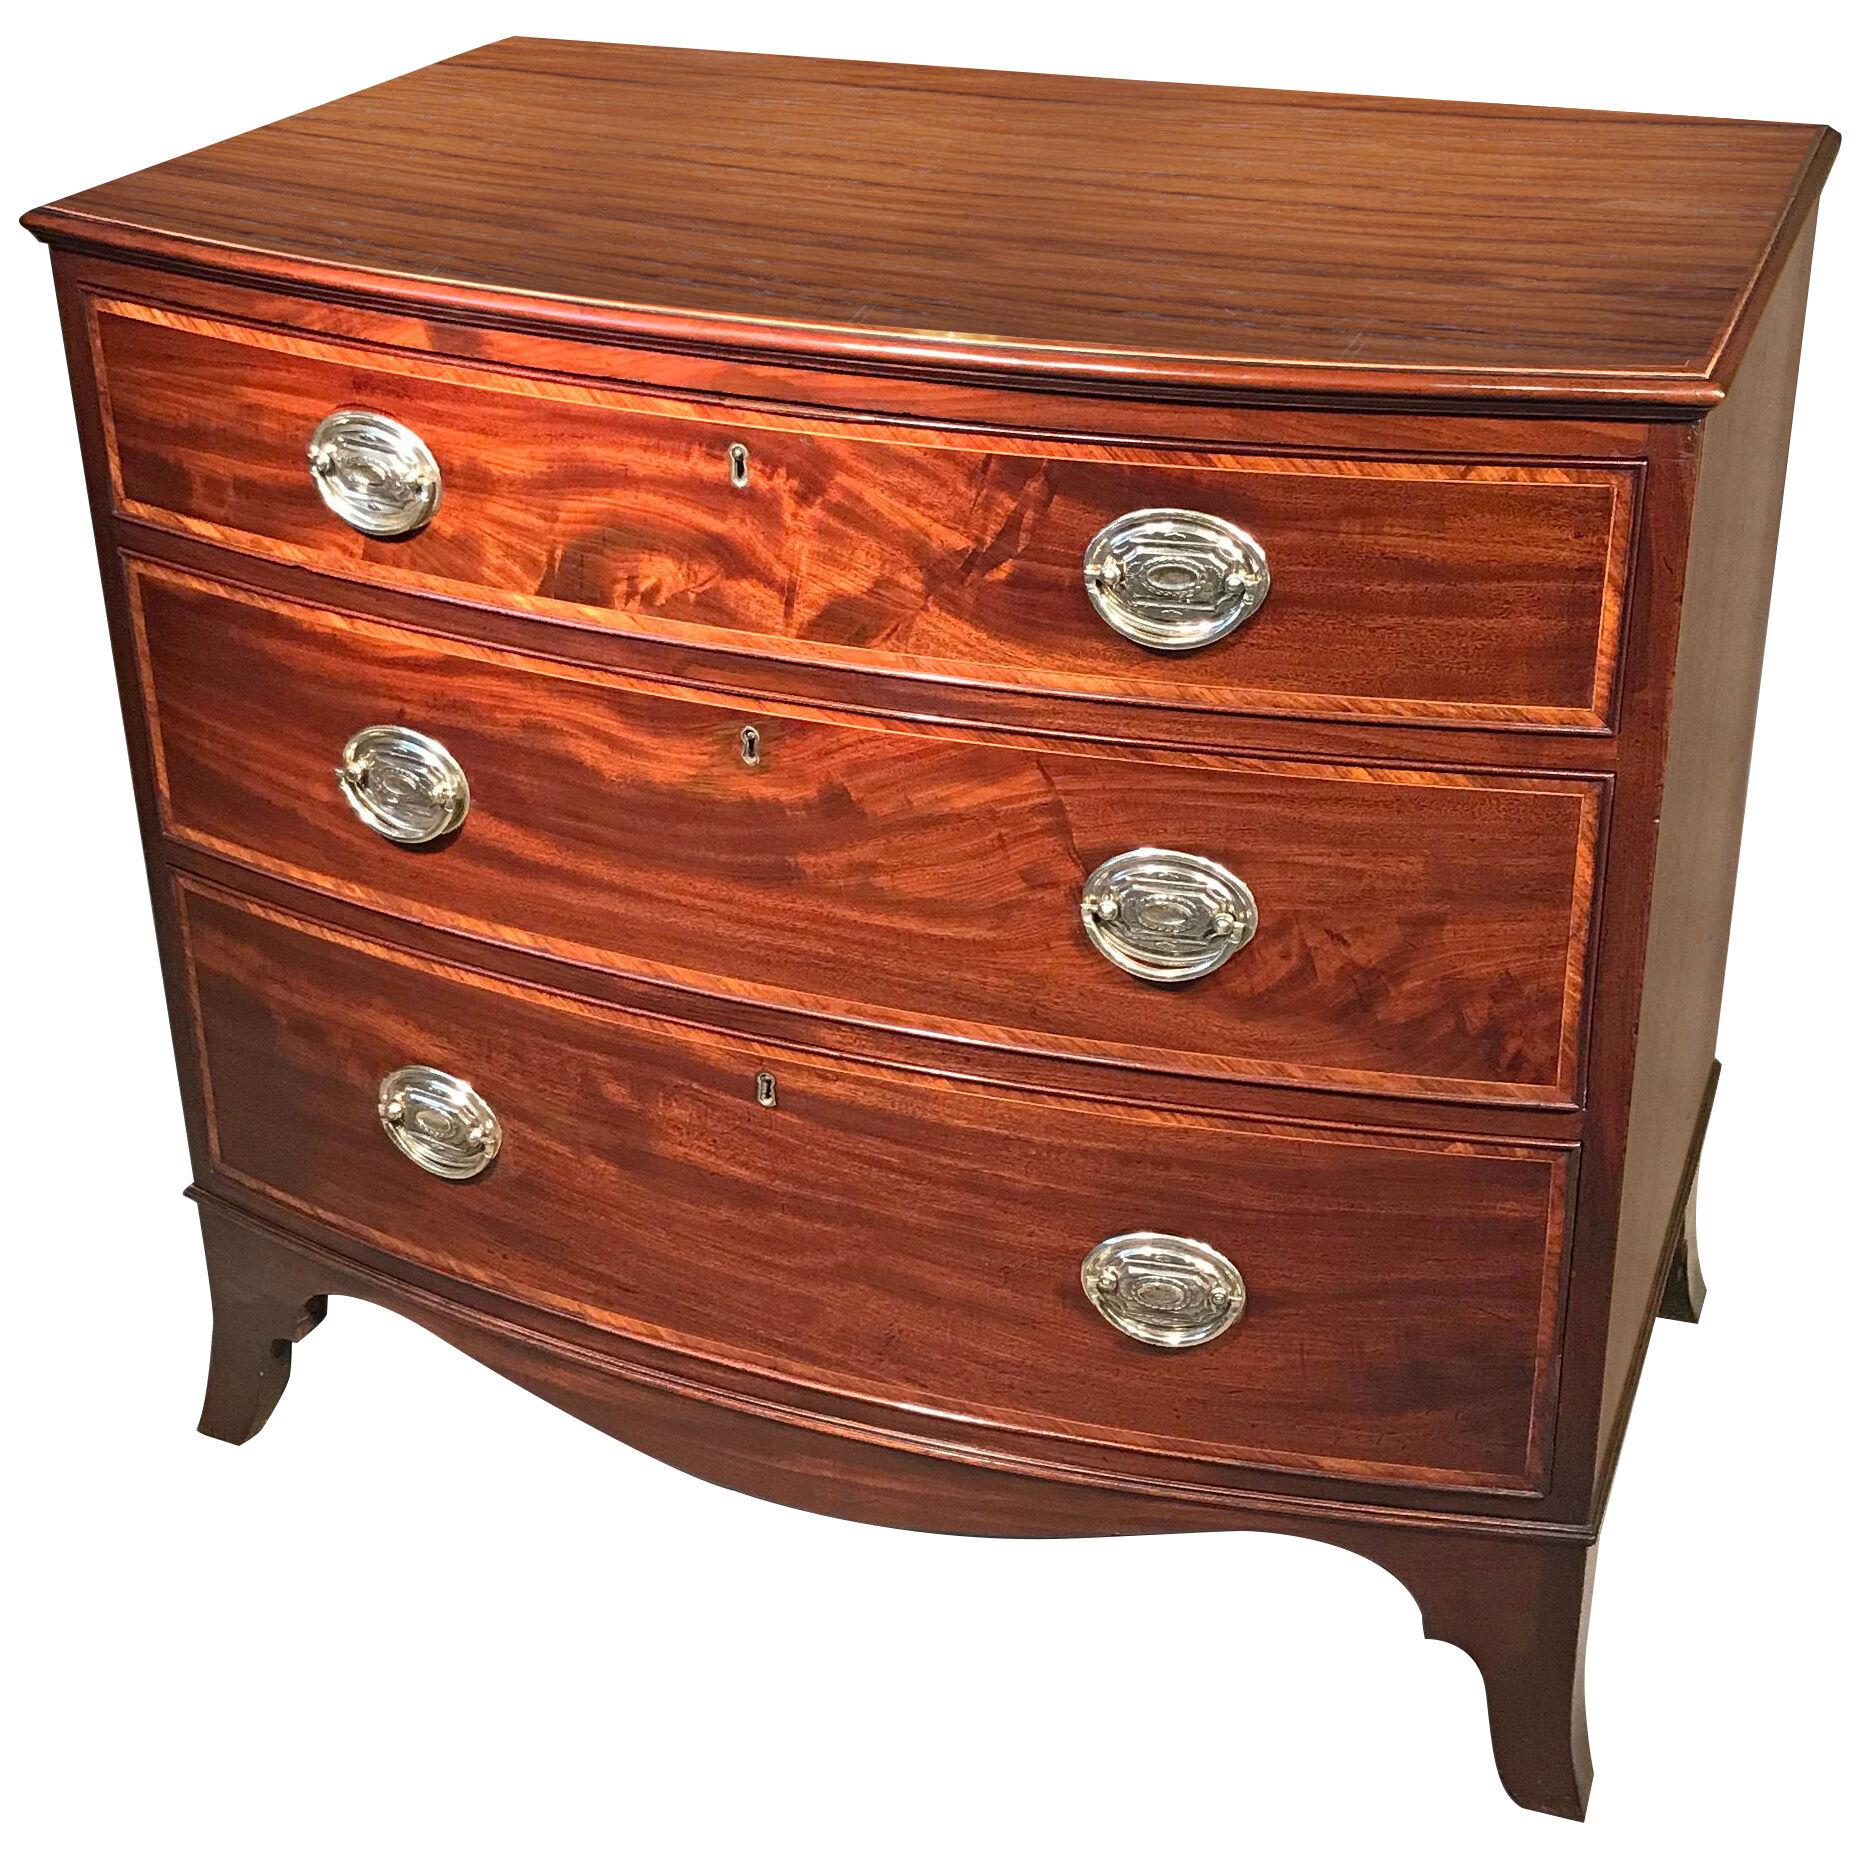 George III Period Mahogany and Inlaid Bow-fronted Chest of Drawers